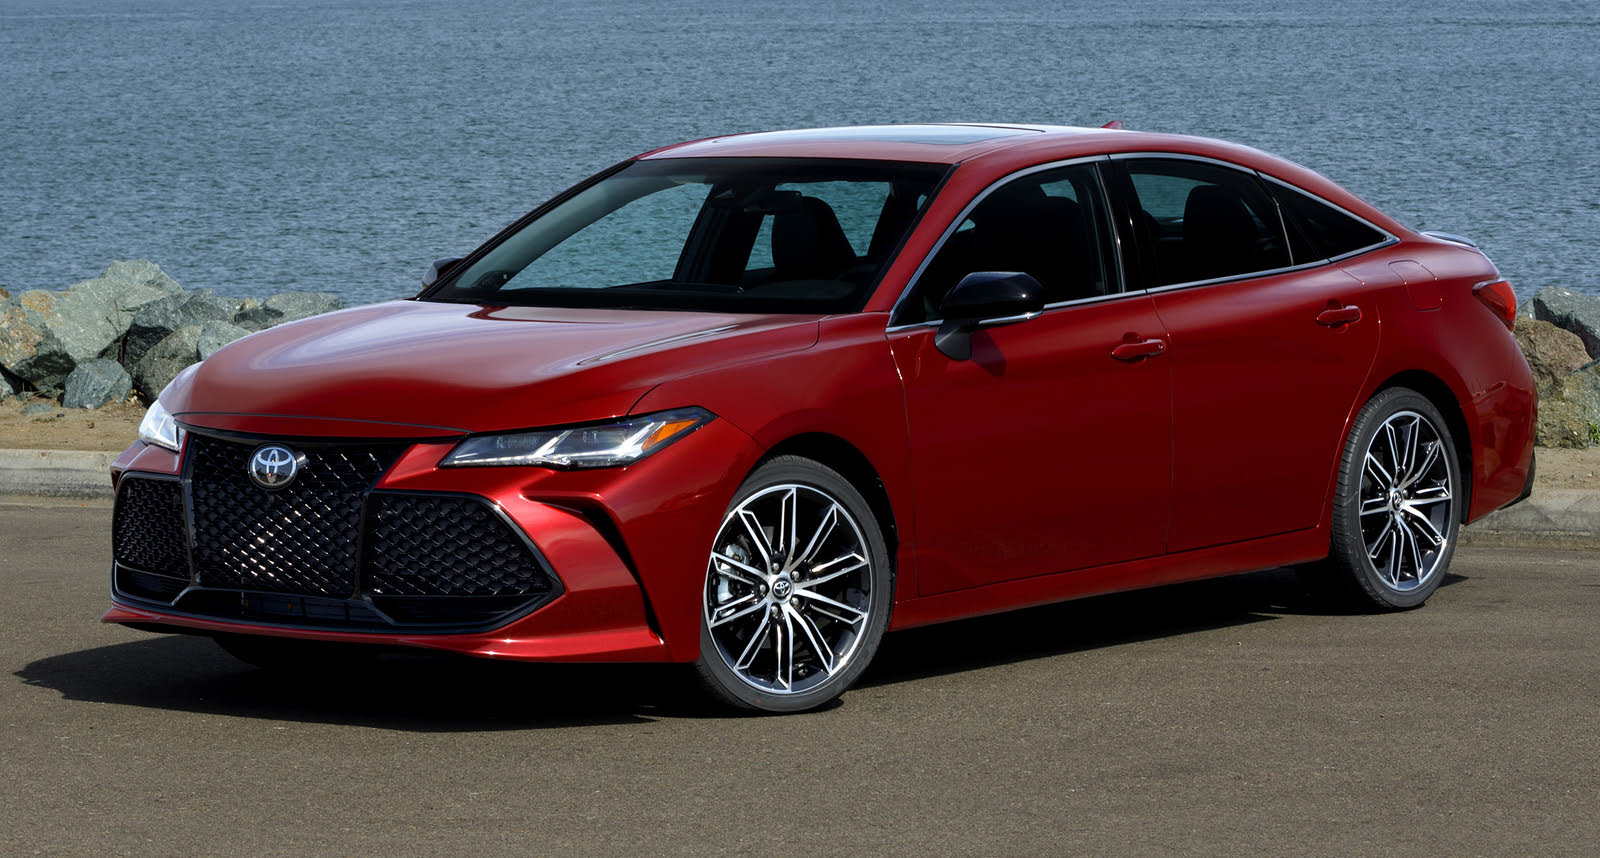 2022 Toyota Avalon Prices, Reviews, and Pictures